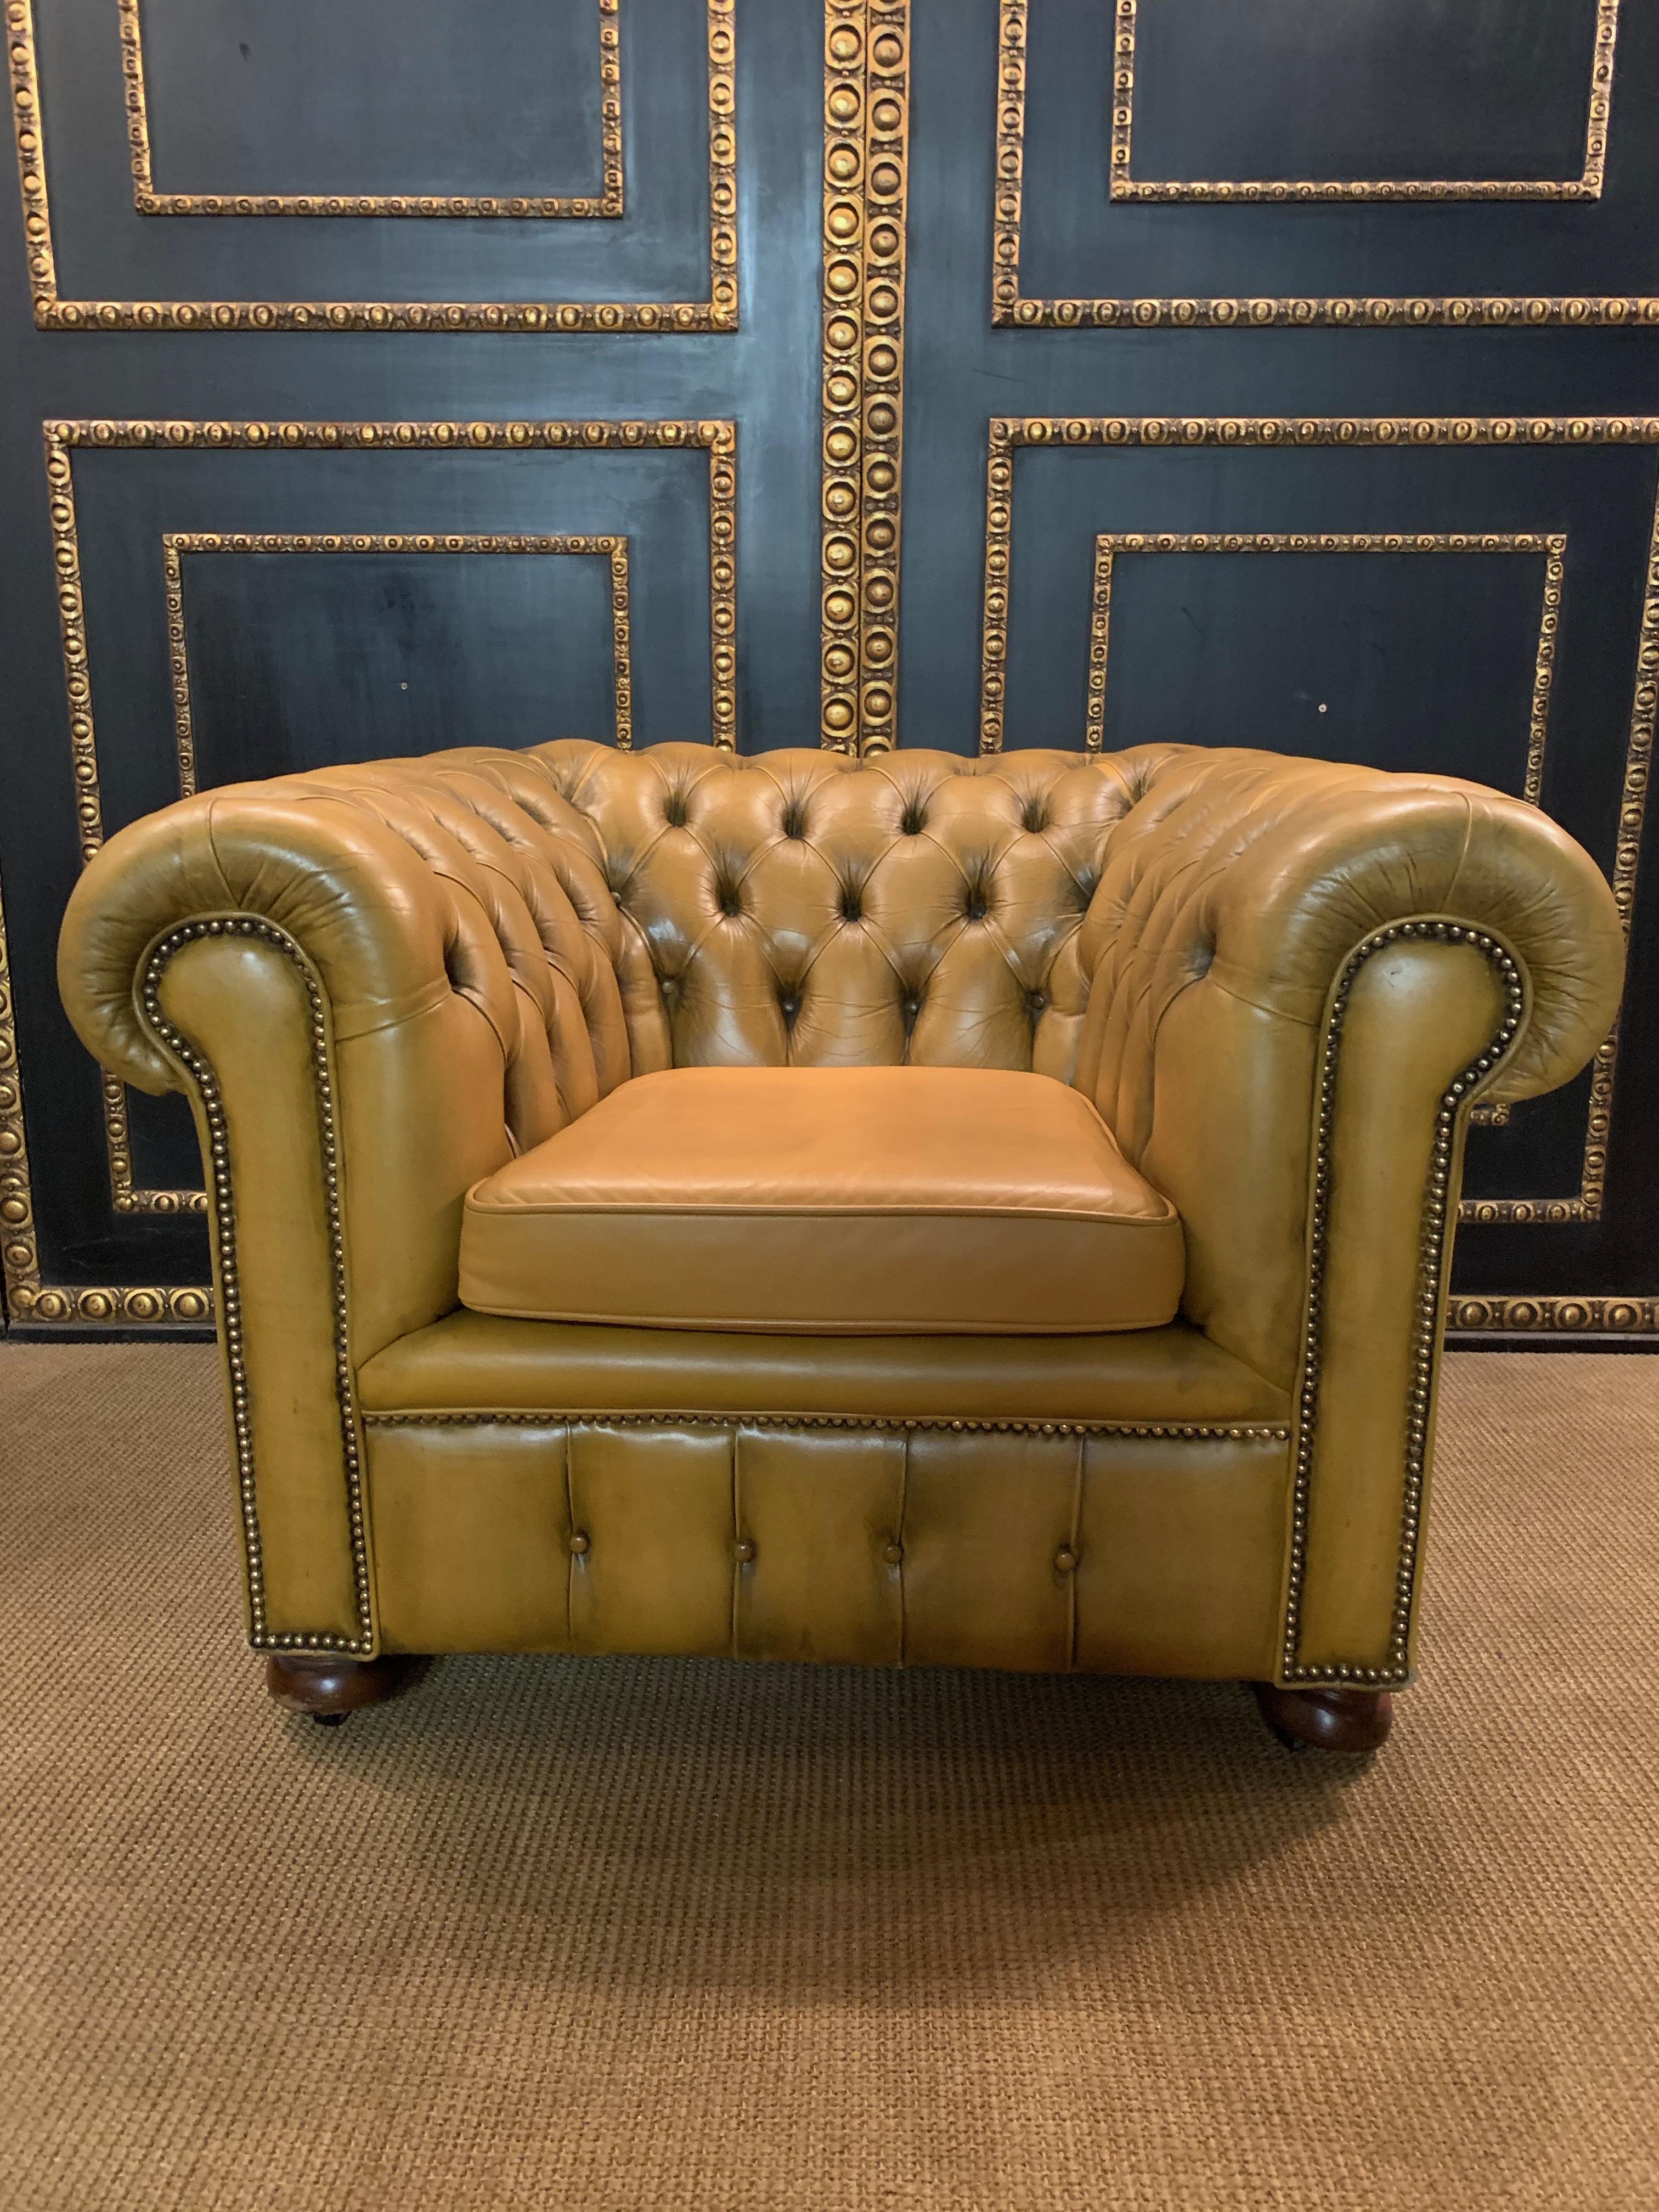 Mustard Yellow original Leather Chesterfield Club Suite set Armchair and Sofa 7